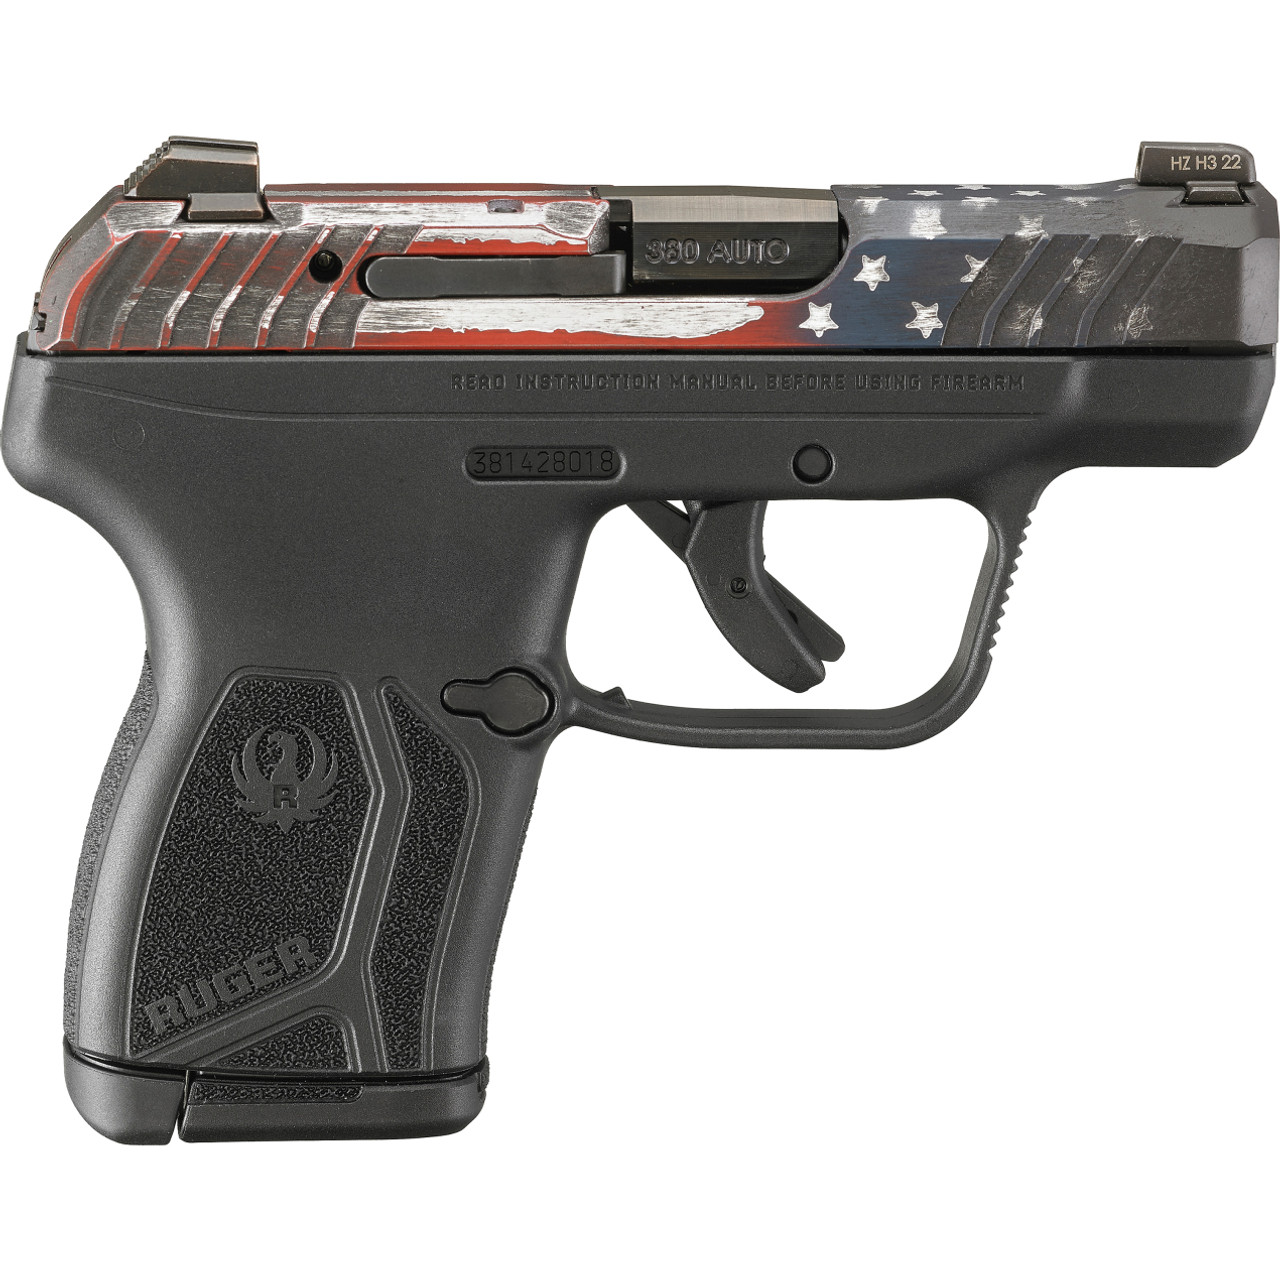 https://cdn11.bigcommerce.com/s-1kqh9qmybo/images/stencil/1280x1280/products/81580/193007/ruger-rugerlcpmax-13745__90235.1680713142.jpg?c=2